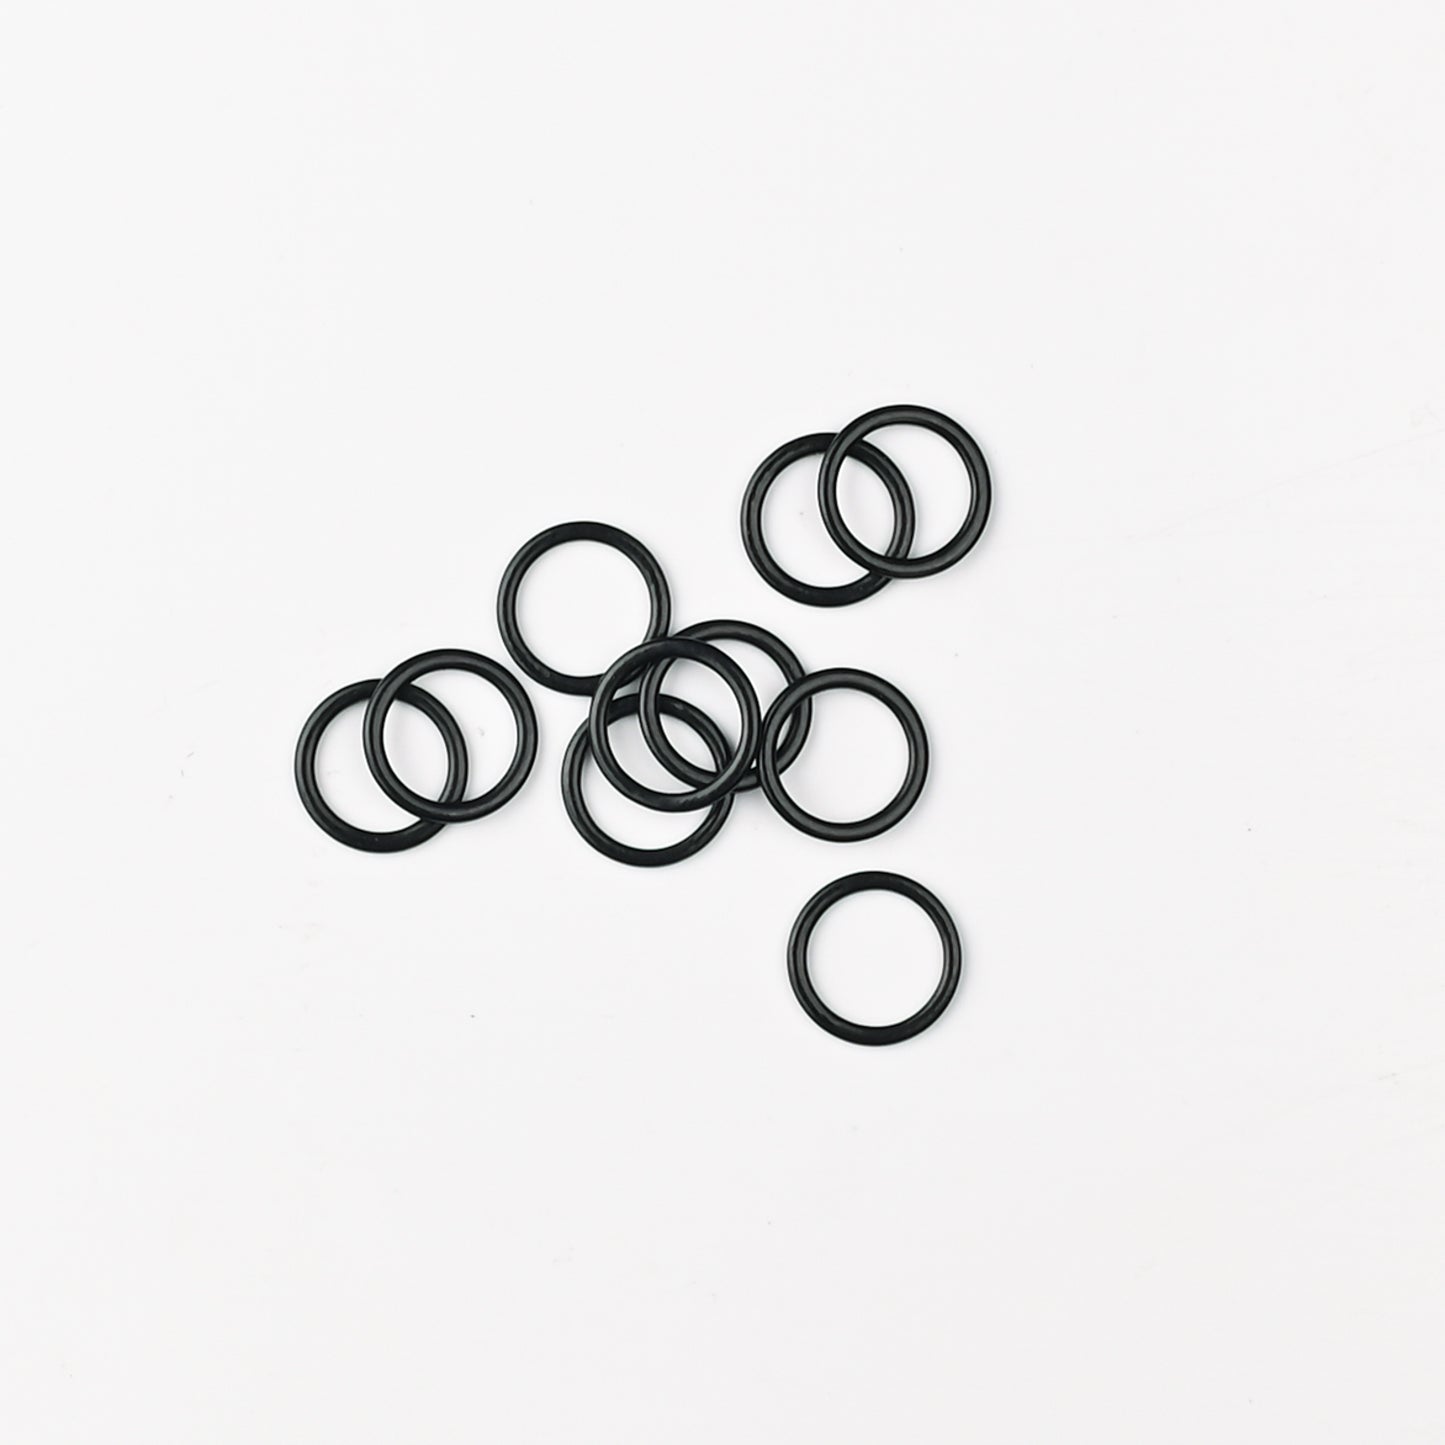 Bra Accessories Circles  10mm Black & White - TO BE DISCONTINUED